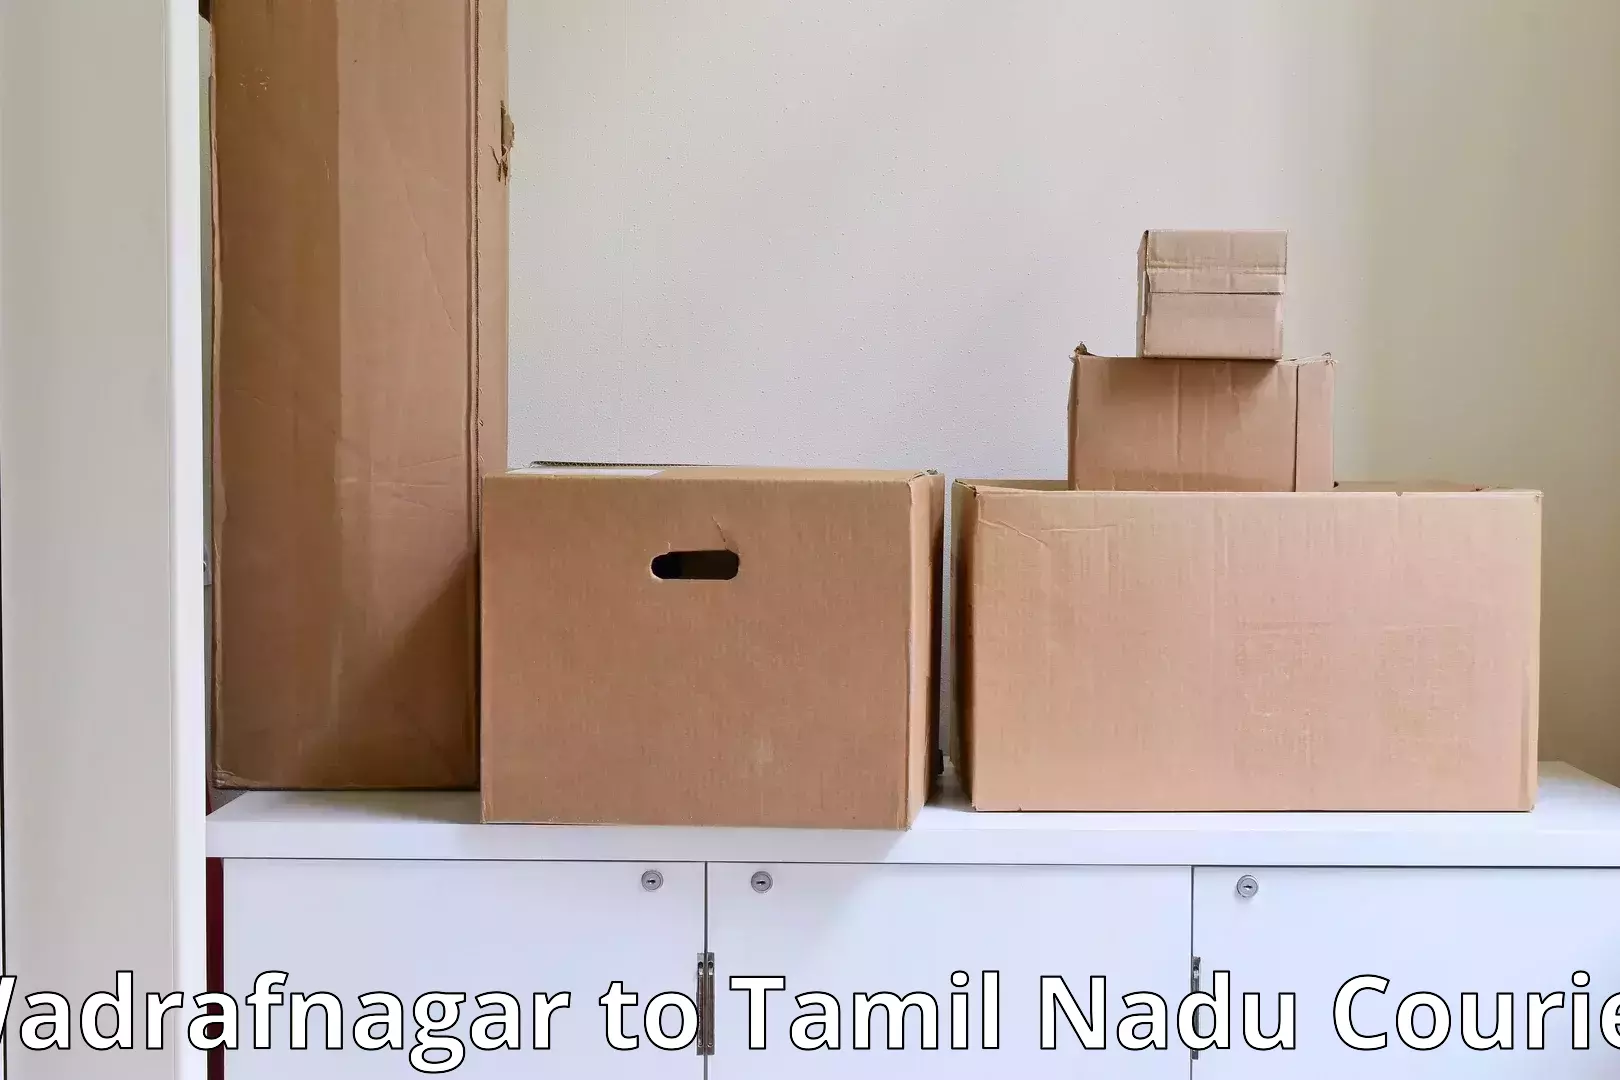 High-quality moving services Wadrafnagar to Meenakshi Academy of Higher Education and Research Chennai